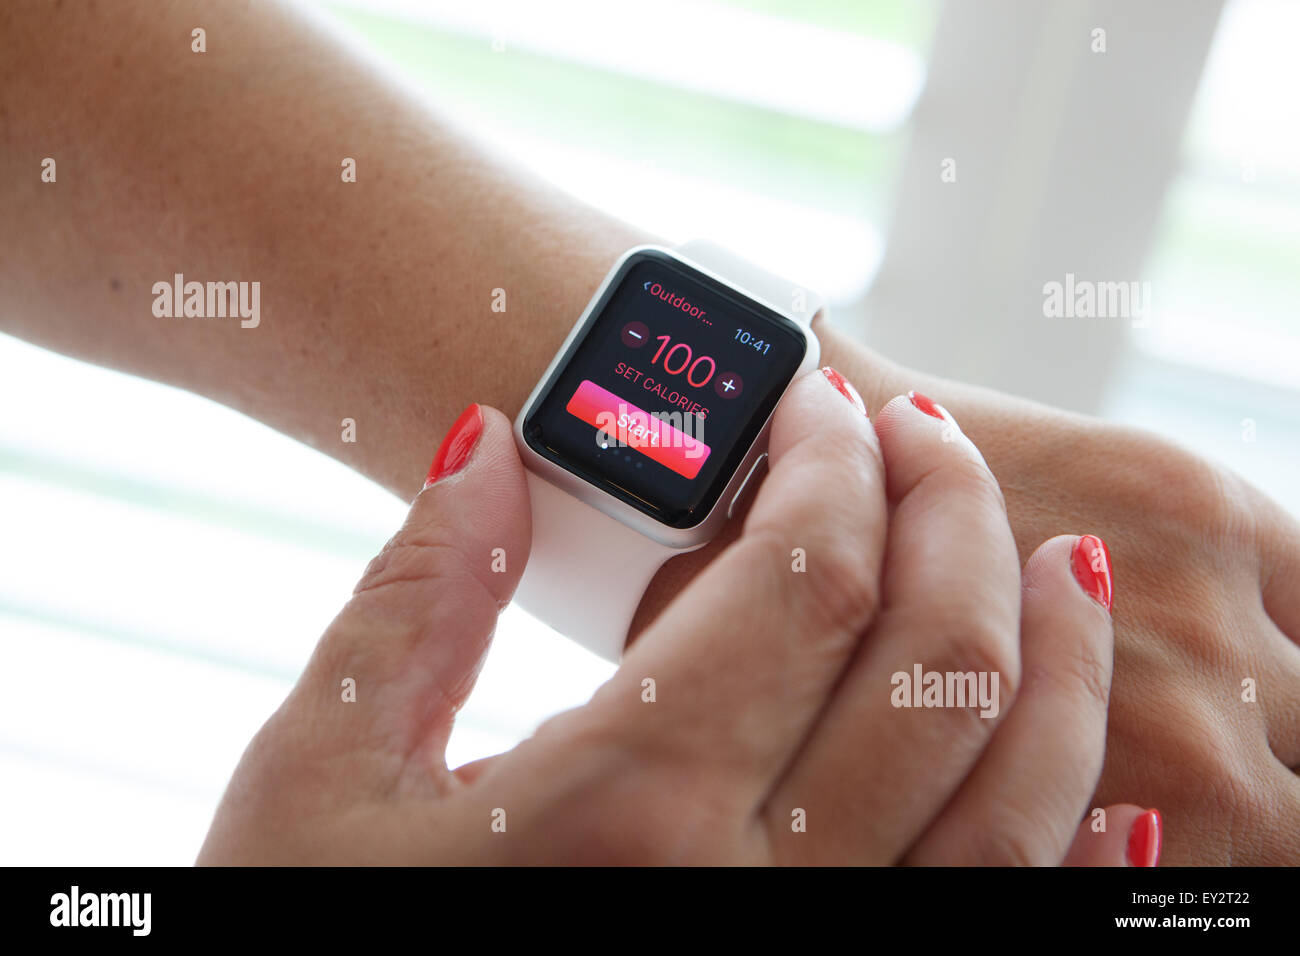 Apple Watch displaying it's calorie counter. Stock Photo